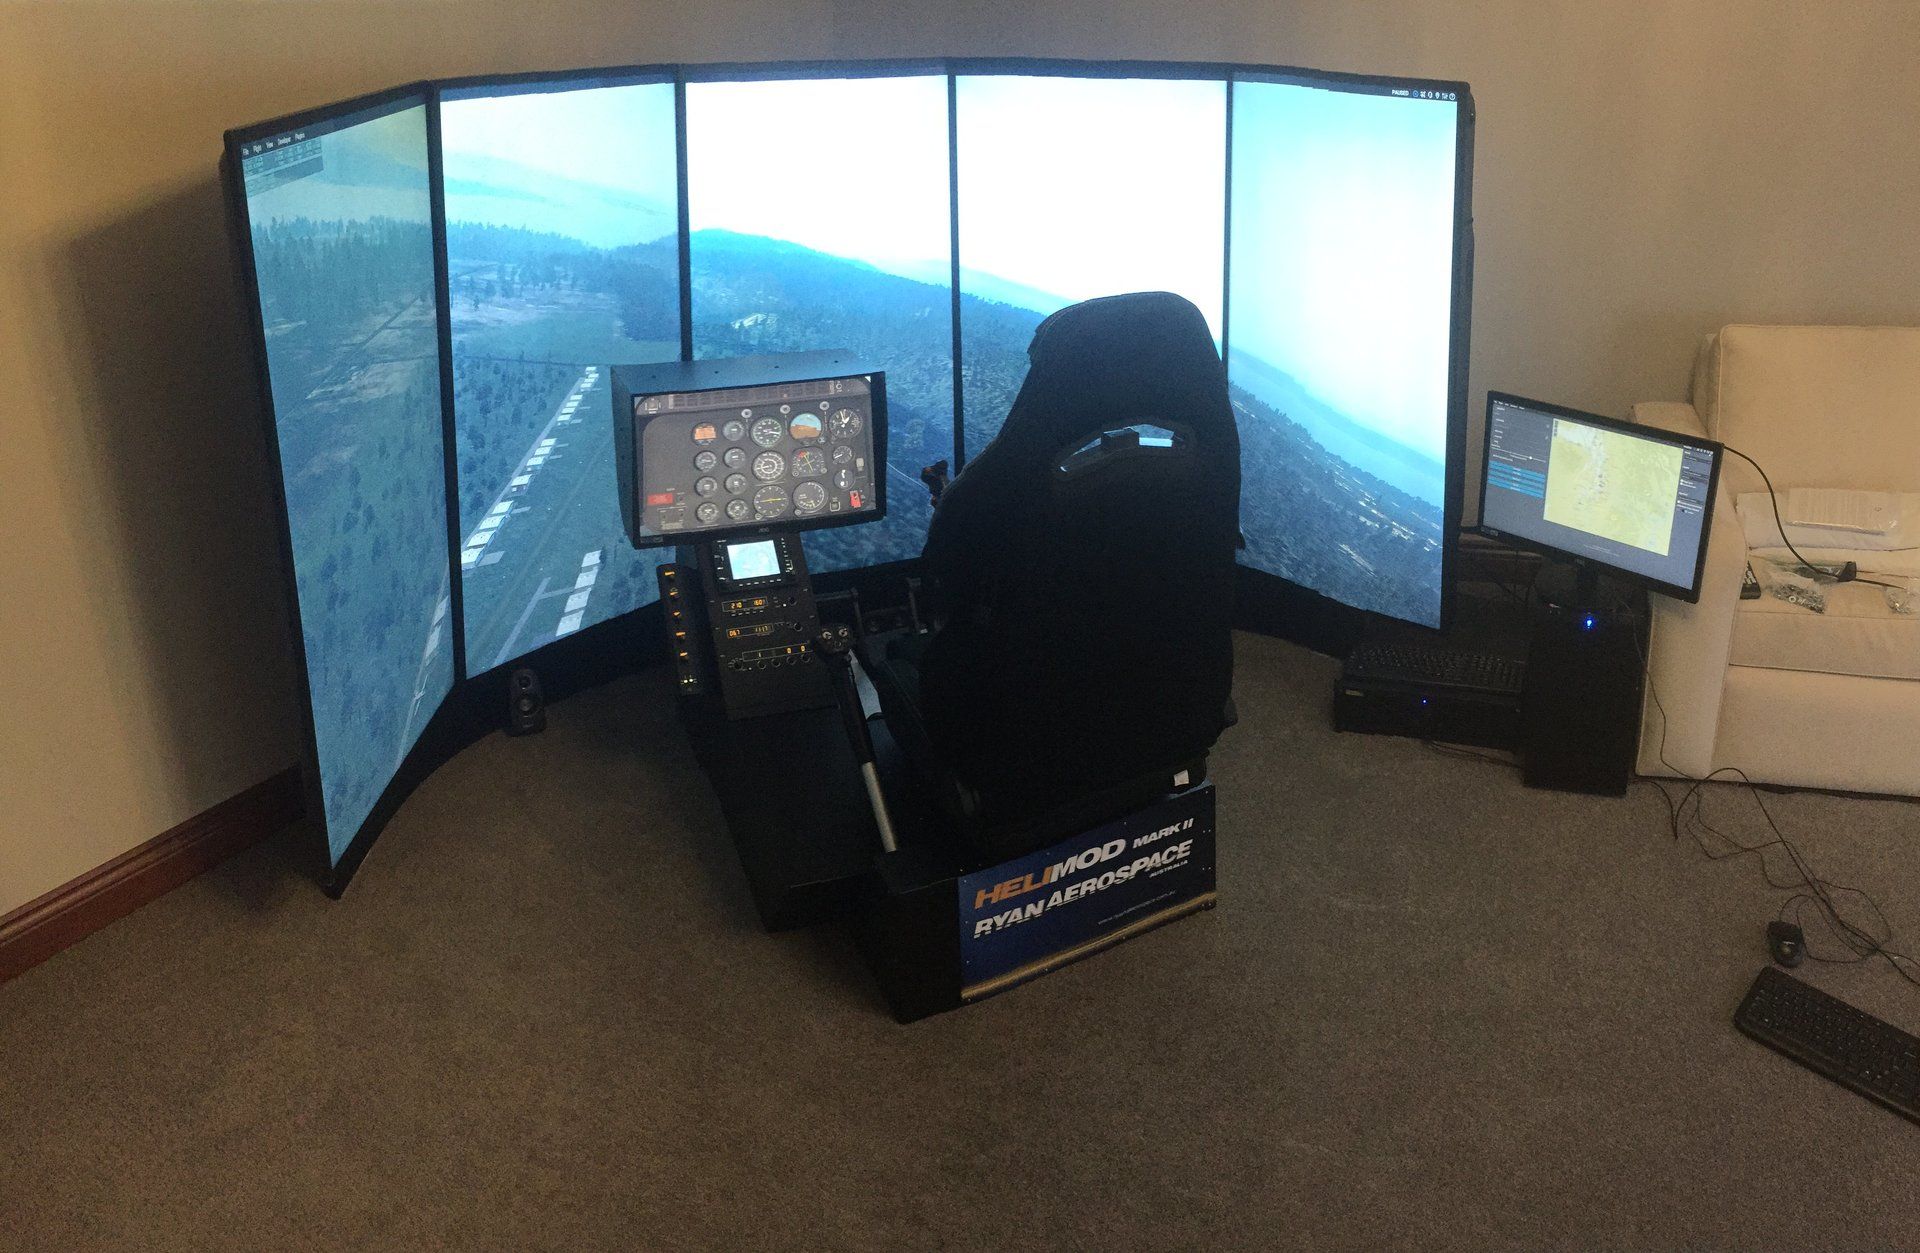 HELIMOD MARK II by RYAN AEROSPACE with five screens - 180 degrees